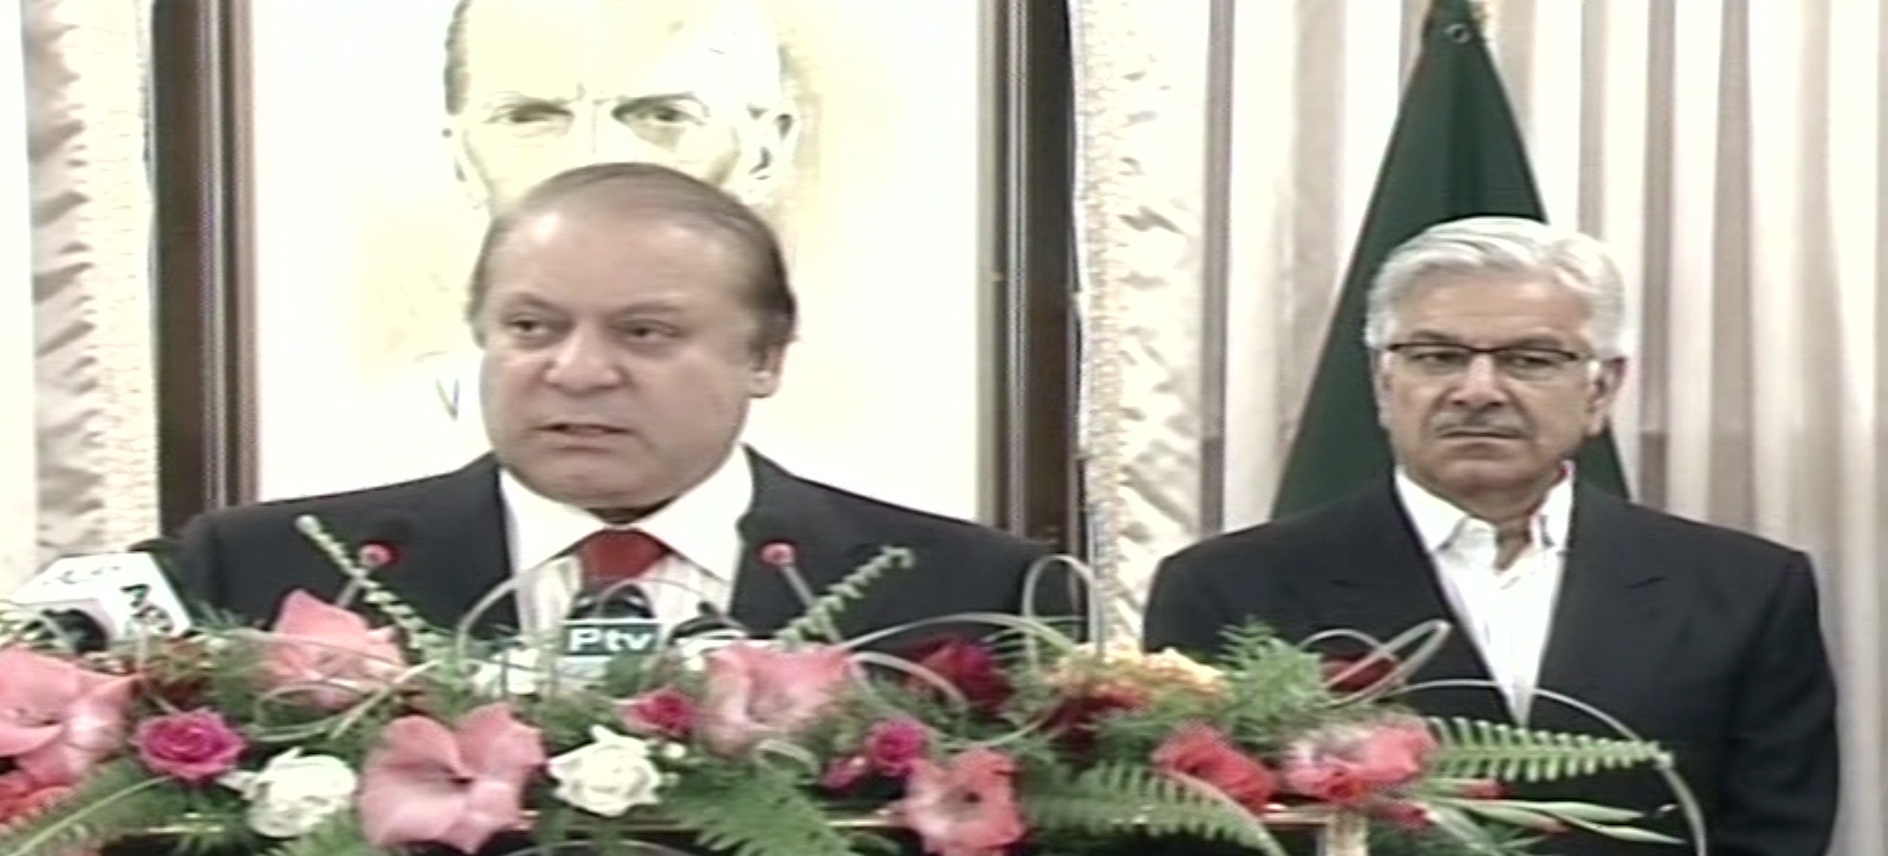 PM reaffirms commitment to Saudi Arabia's territorial sovereignty in policy statement 